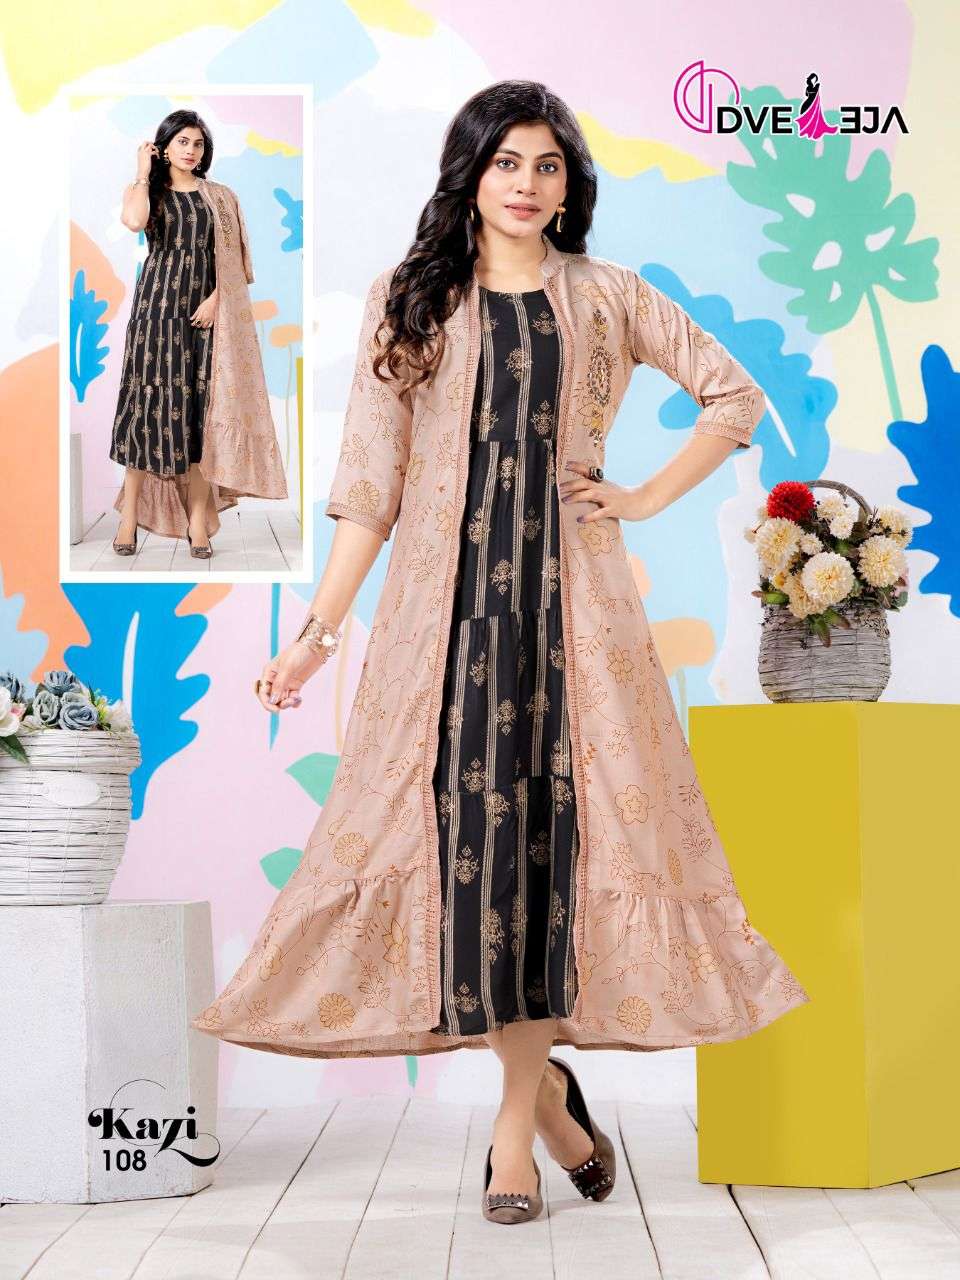 KAZI BY DVEEJA 101 TO 108 SERIES DESIGNER STYLISH FANCY COLORFUL BEAUTIFUL PARTY WEAR & ETHNIC WEAR COLLECTION HEAVY RAYON KURTIS WITH JACKET AT WHOLESALE PRICE